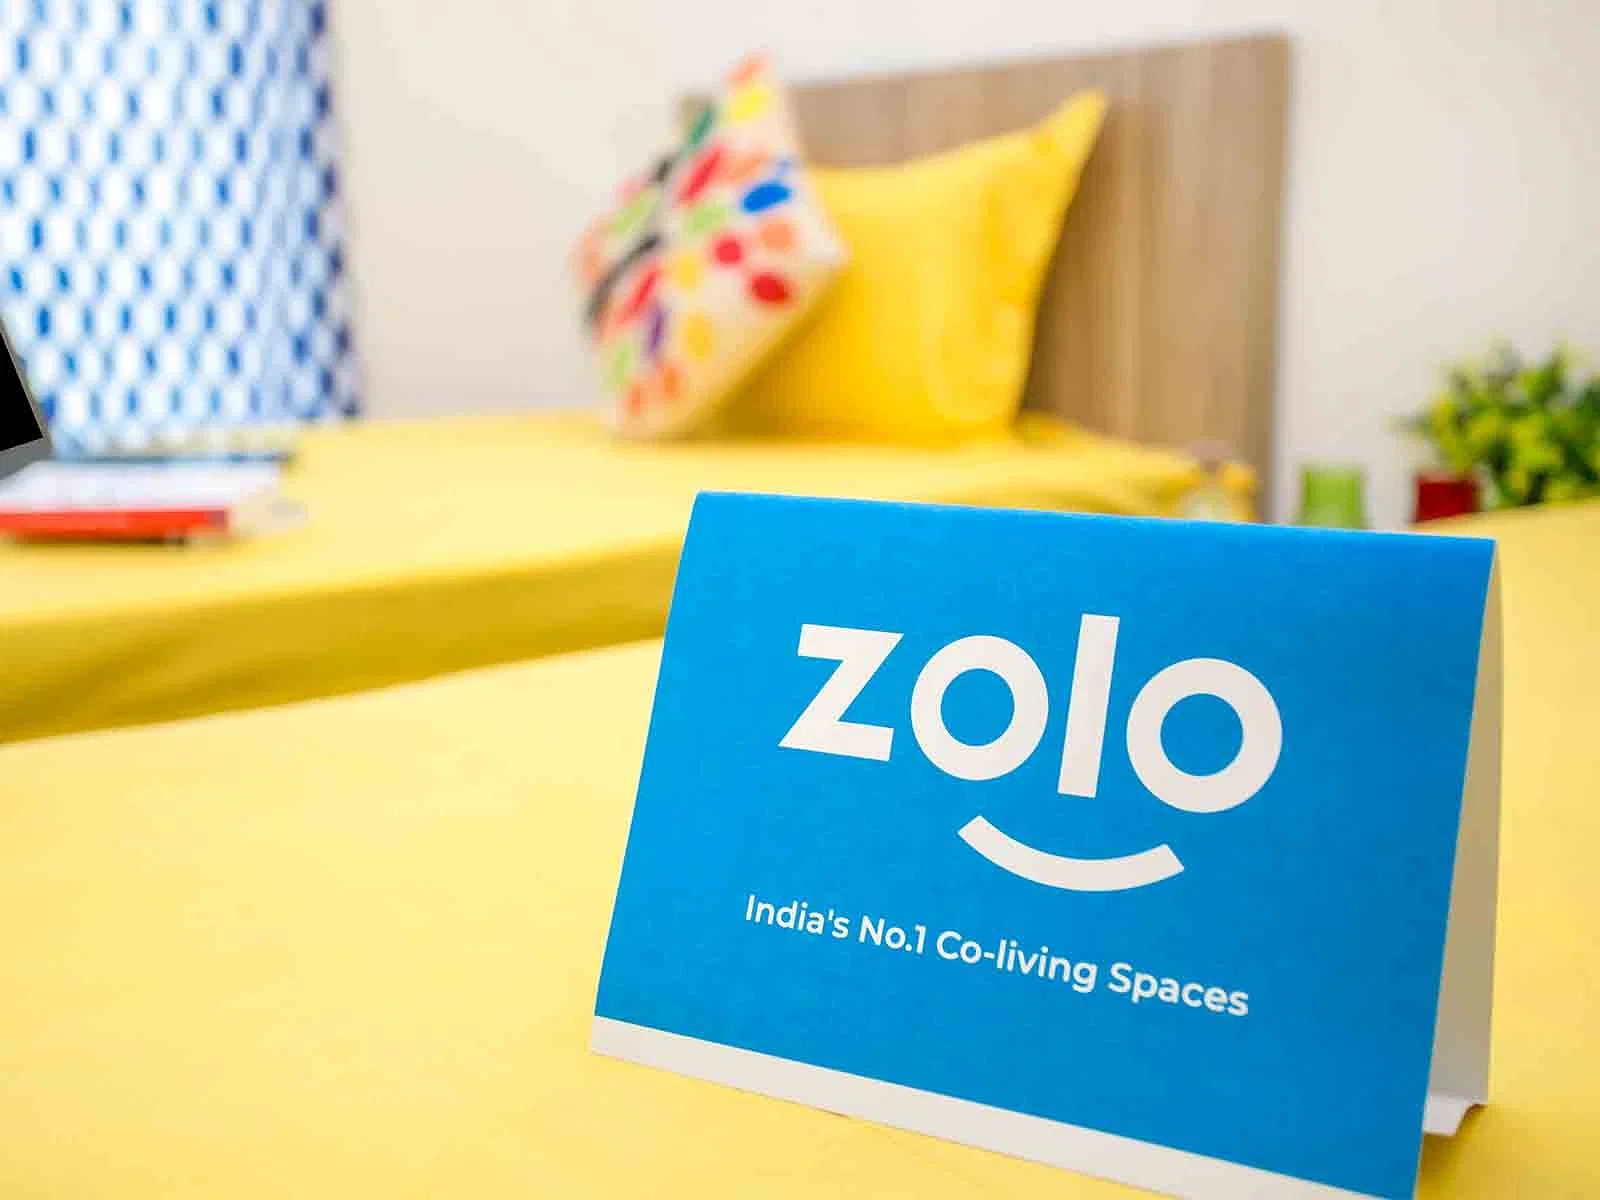 fully furnished Zolo single rooms for rent near me-check out now-Zolo Montego